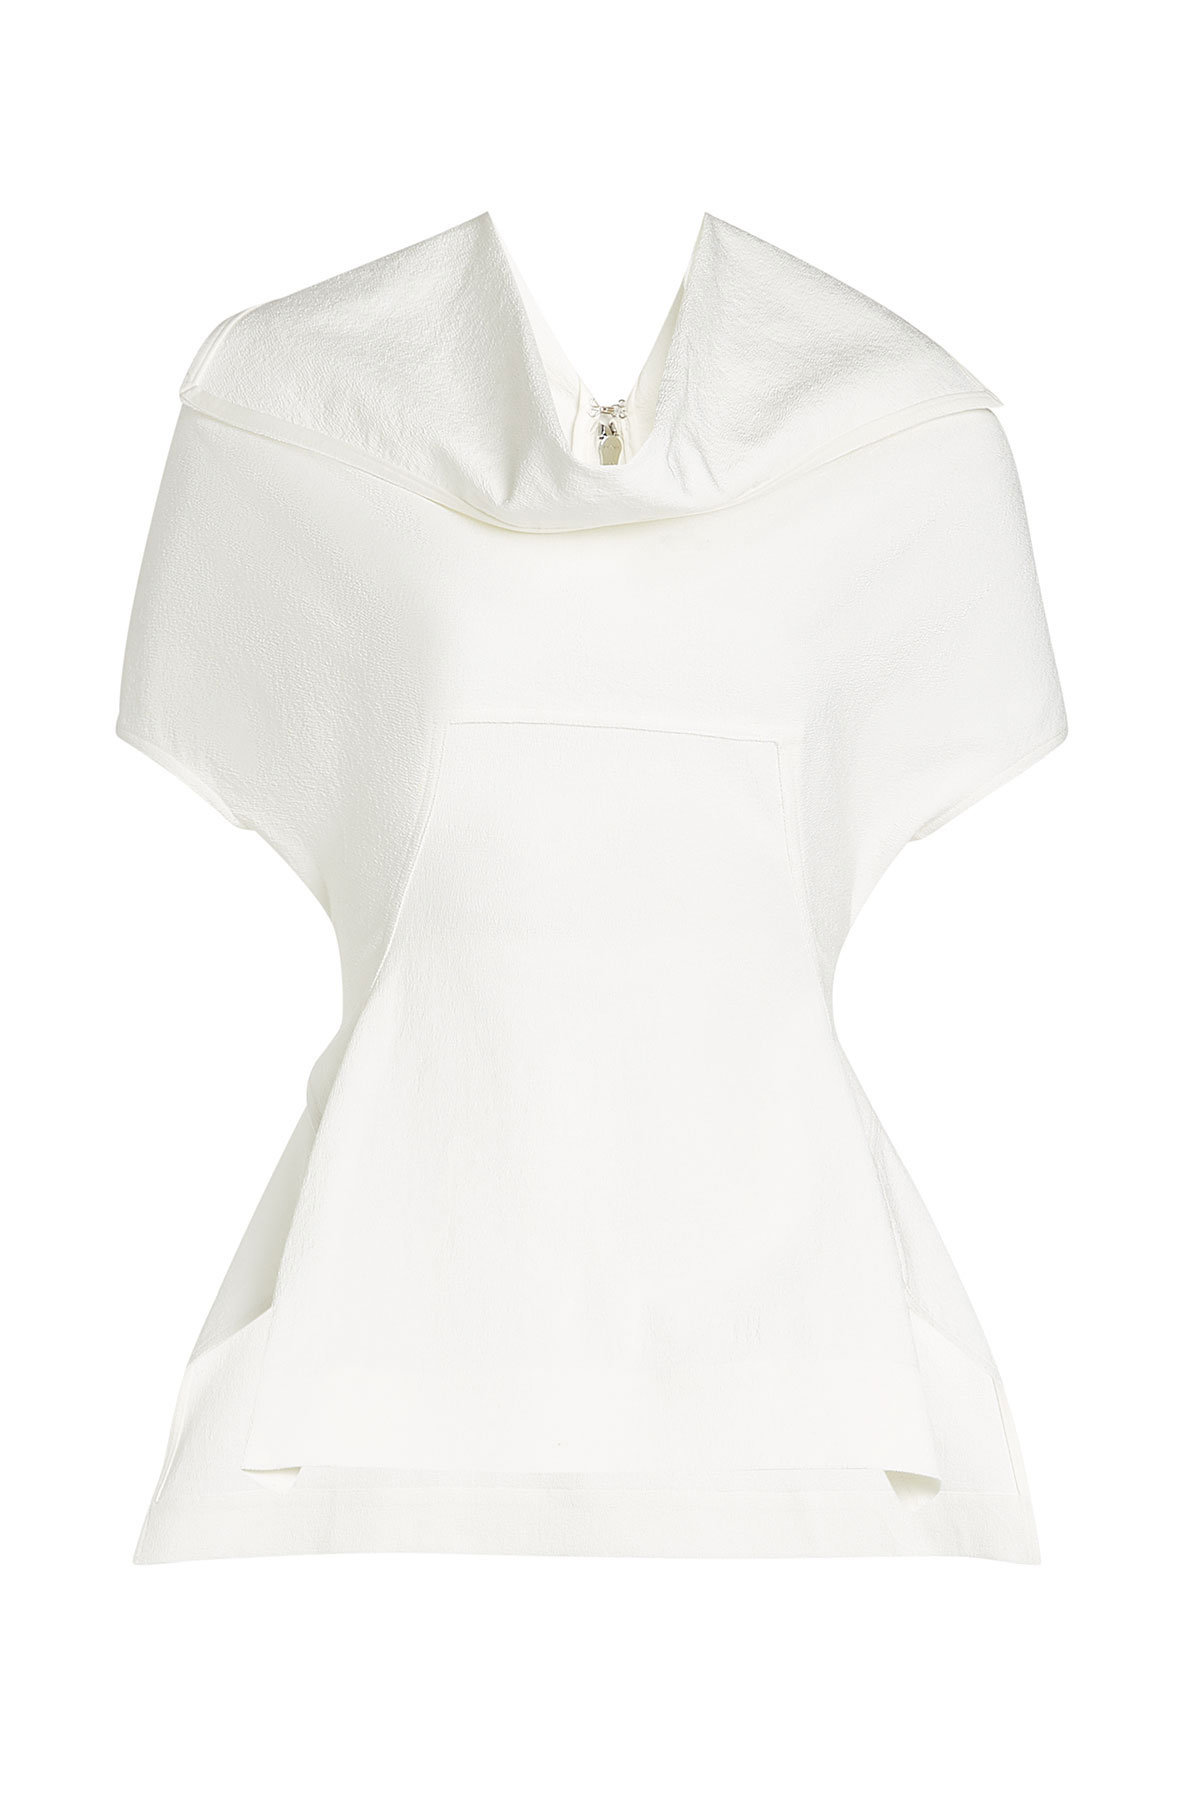 Rick Owens - Draped Top with Cotton